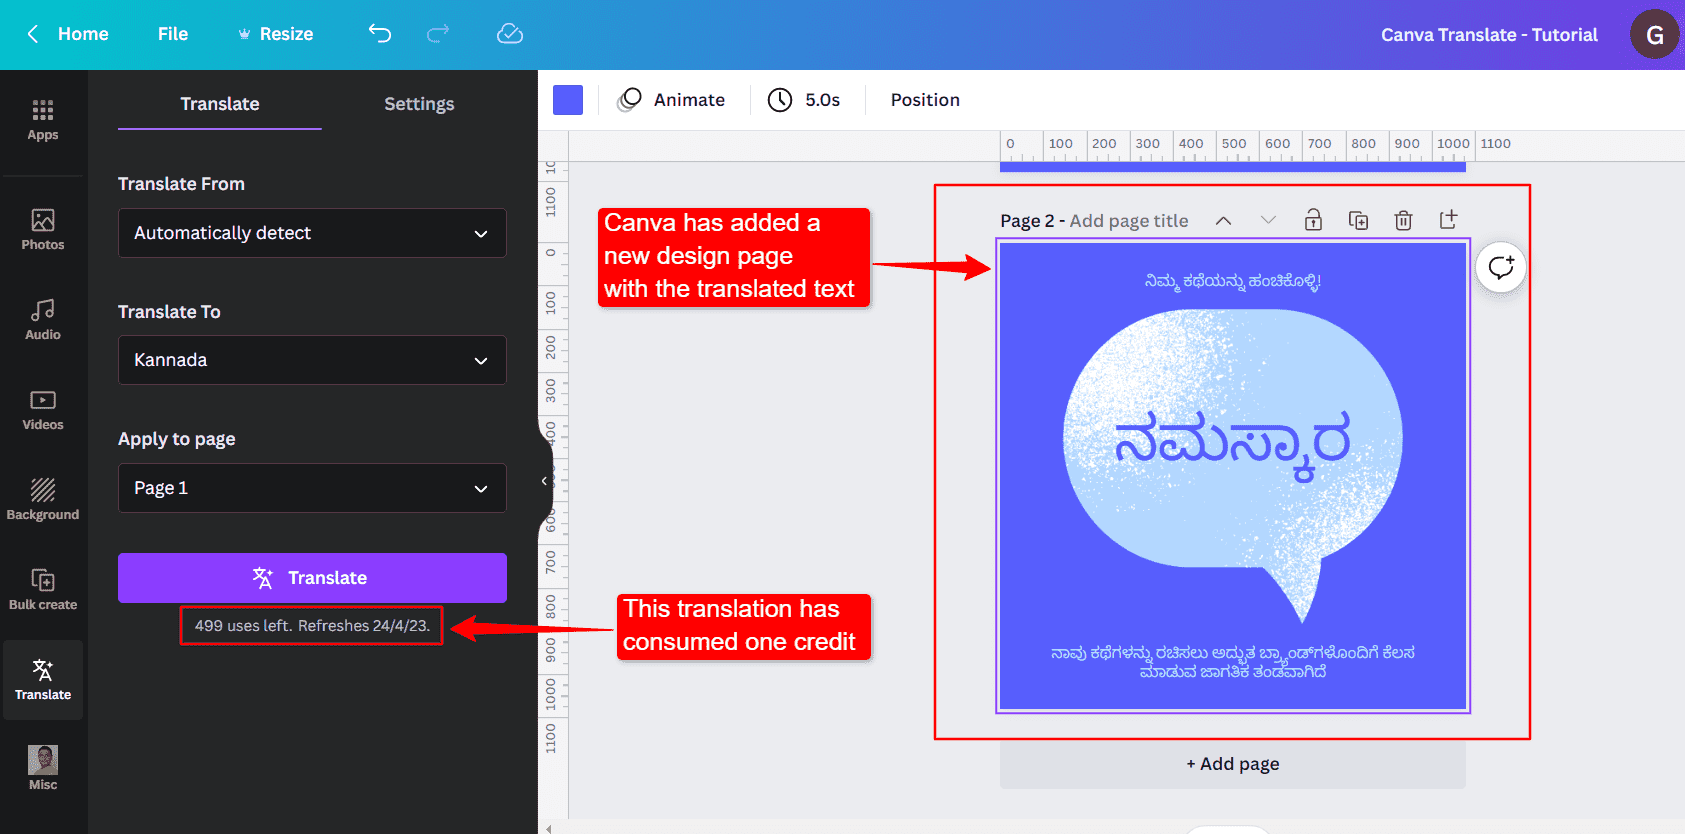 Canva Translate Feature Overview